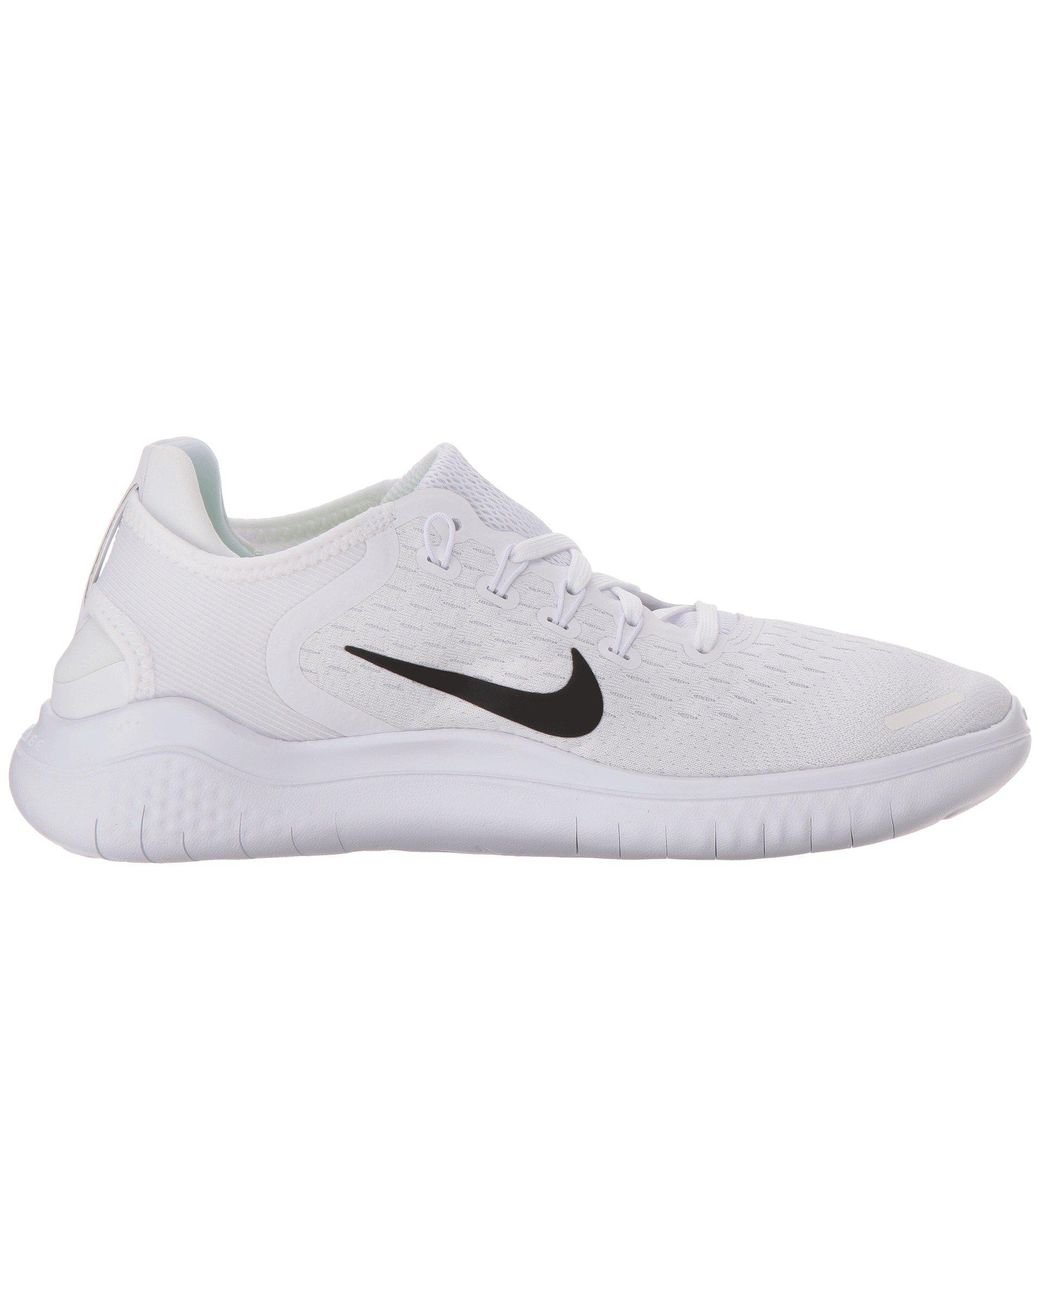 Nike Synthetic Free Rn 2018 Running Shoes in White/Black (White) for Men |  Lyst